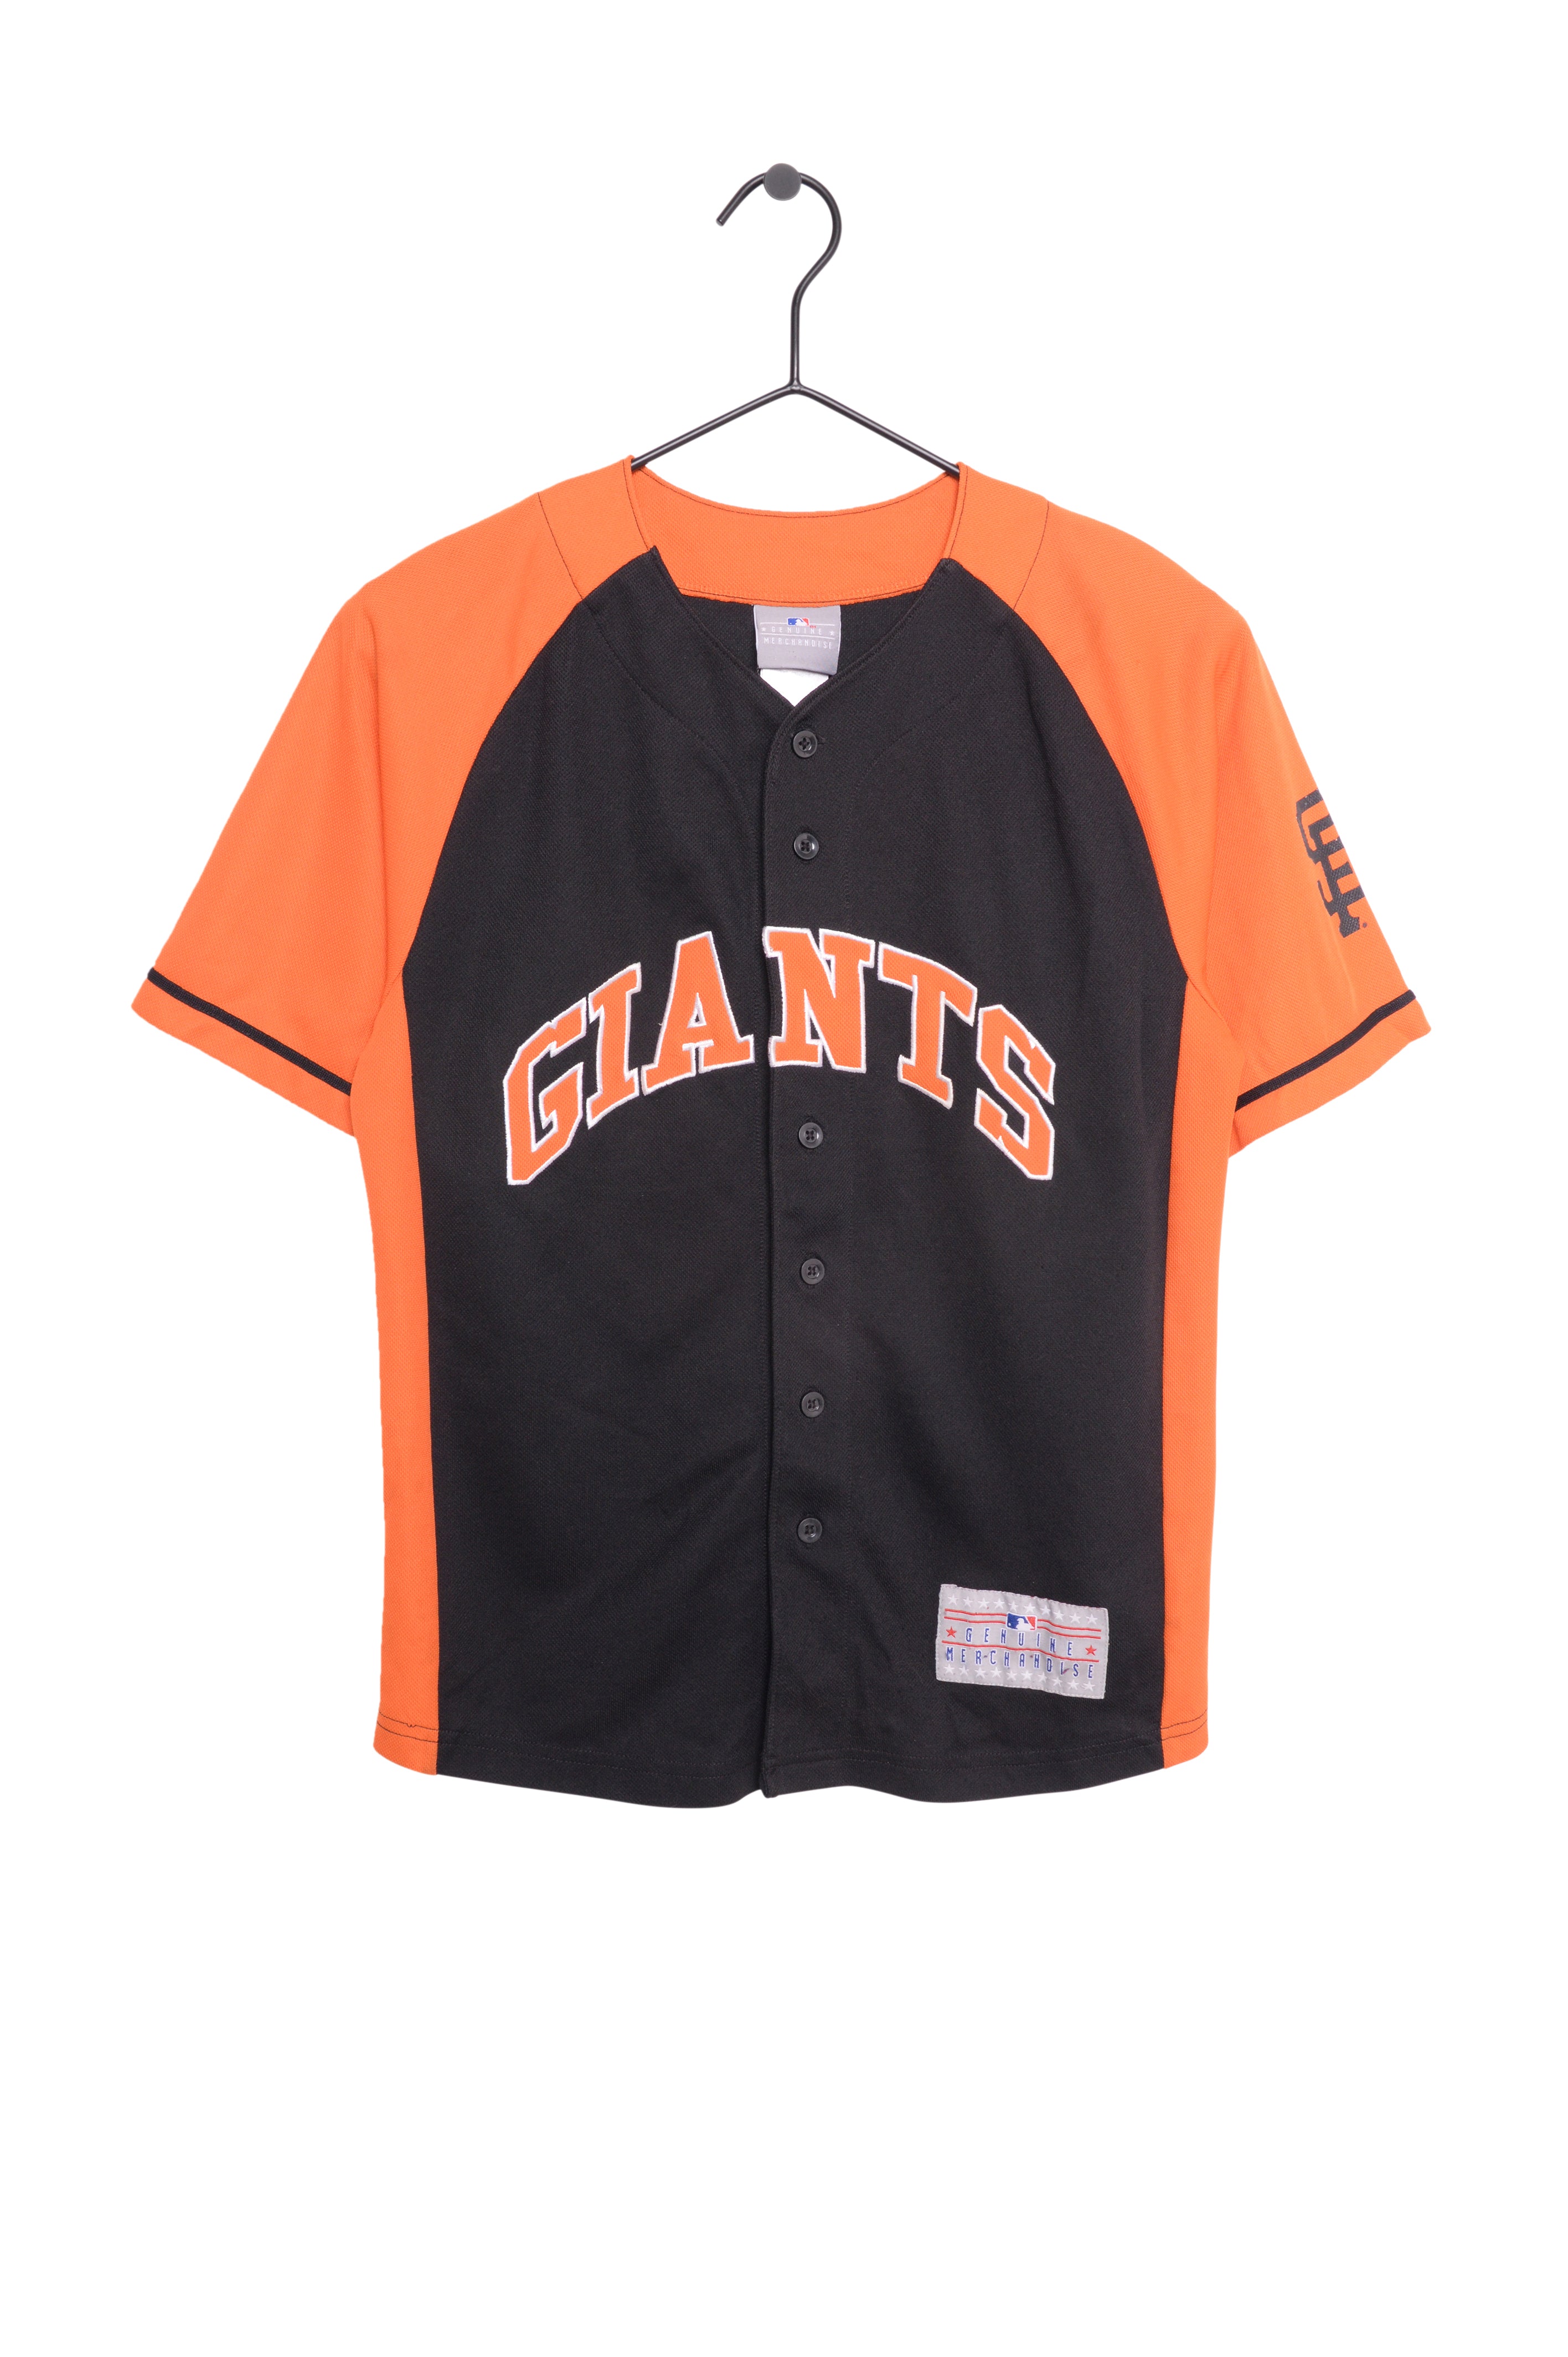 San Francisco Giants Jersey Free Shipping - The Vintage Twin